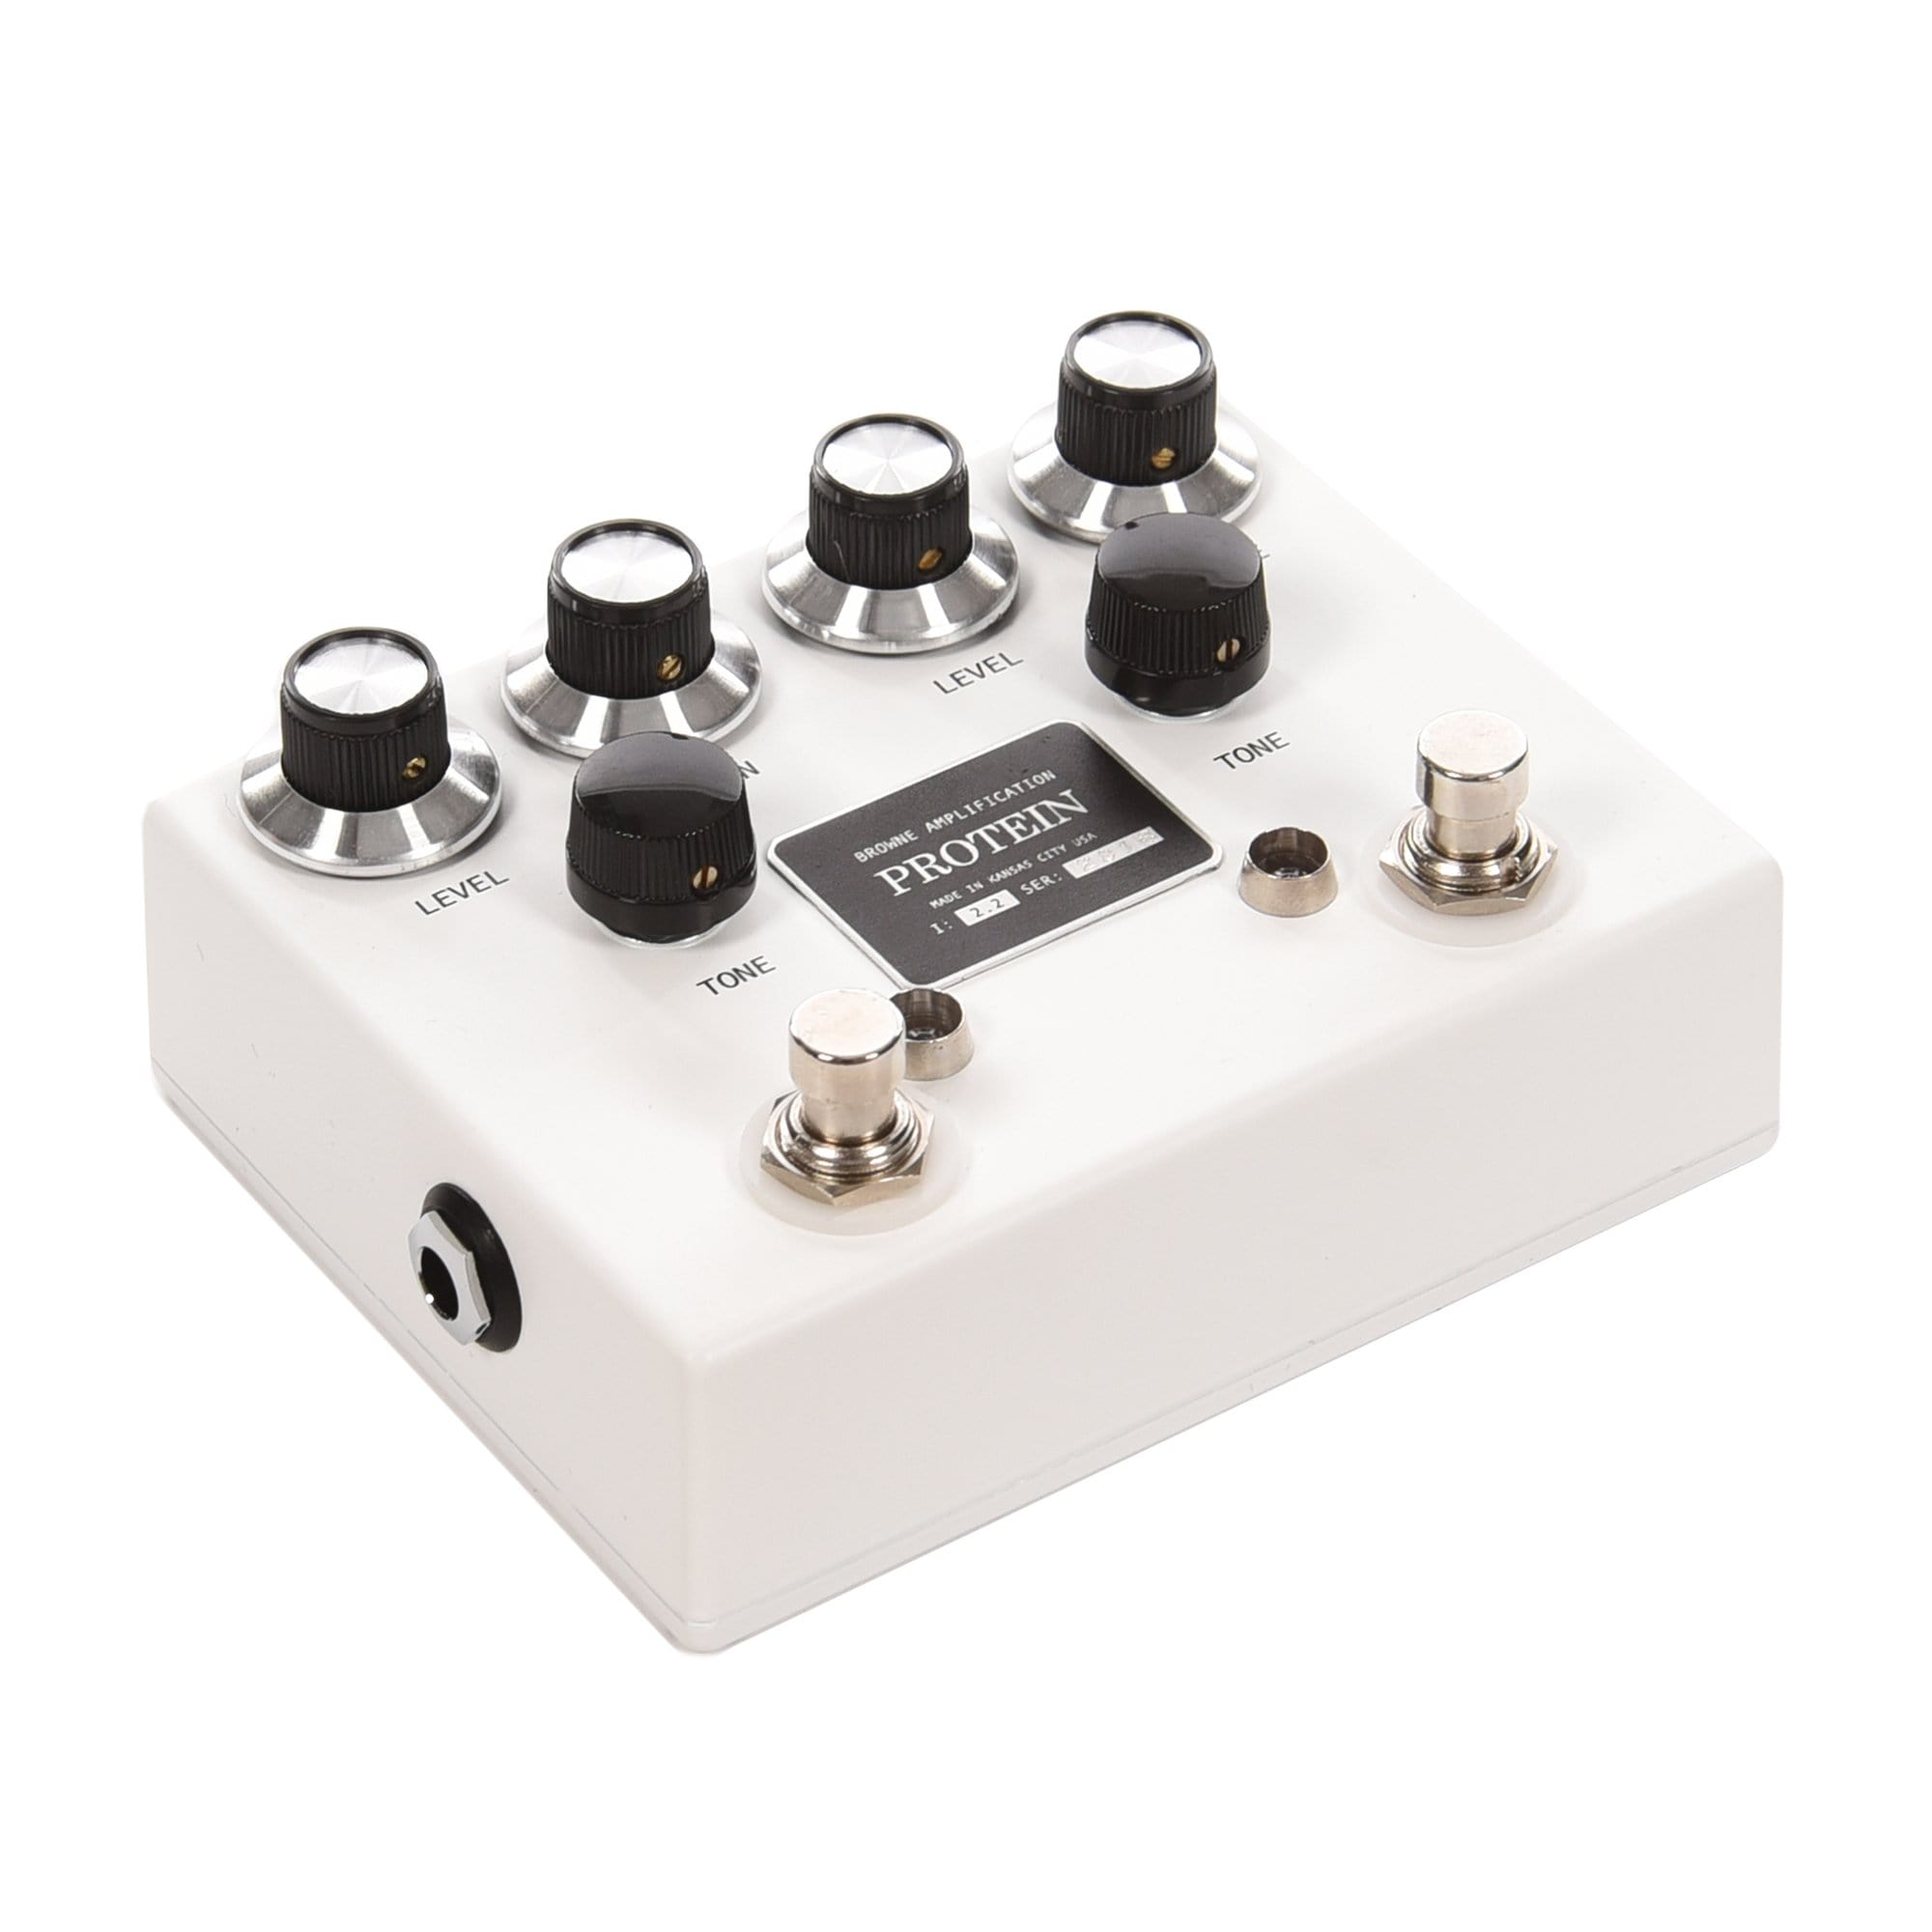 Browne Amplification The Protein Dual Overdrive Pedal White Effects and Pedals / Overdrive and Boost